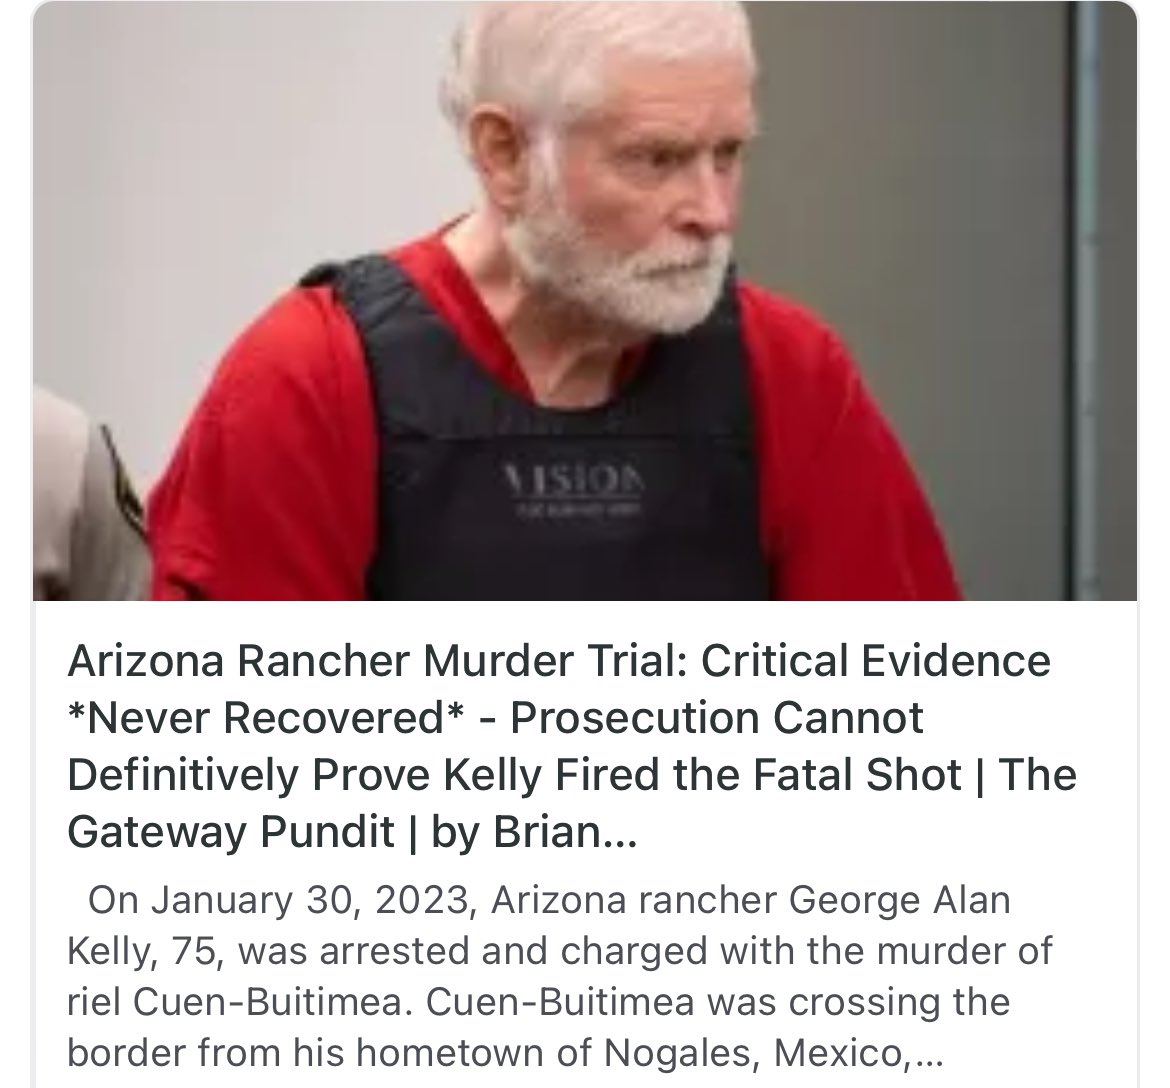 I can’t believe an American is on trial for 2nd degree murder of an illegal who was armed and trespassing! The only witness they have is another illegal who admitted he smuggles drugs and pays human traffickers! This is infuriating!! 😡